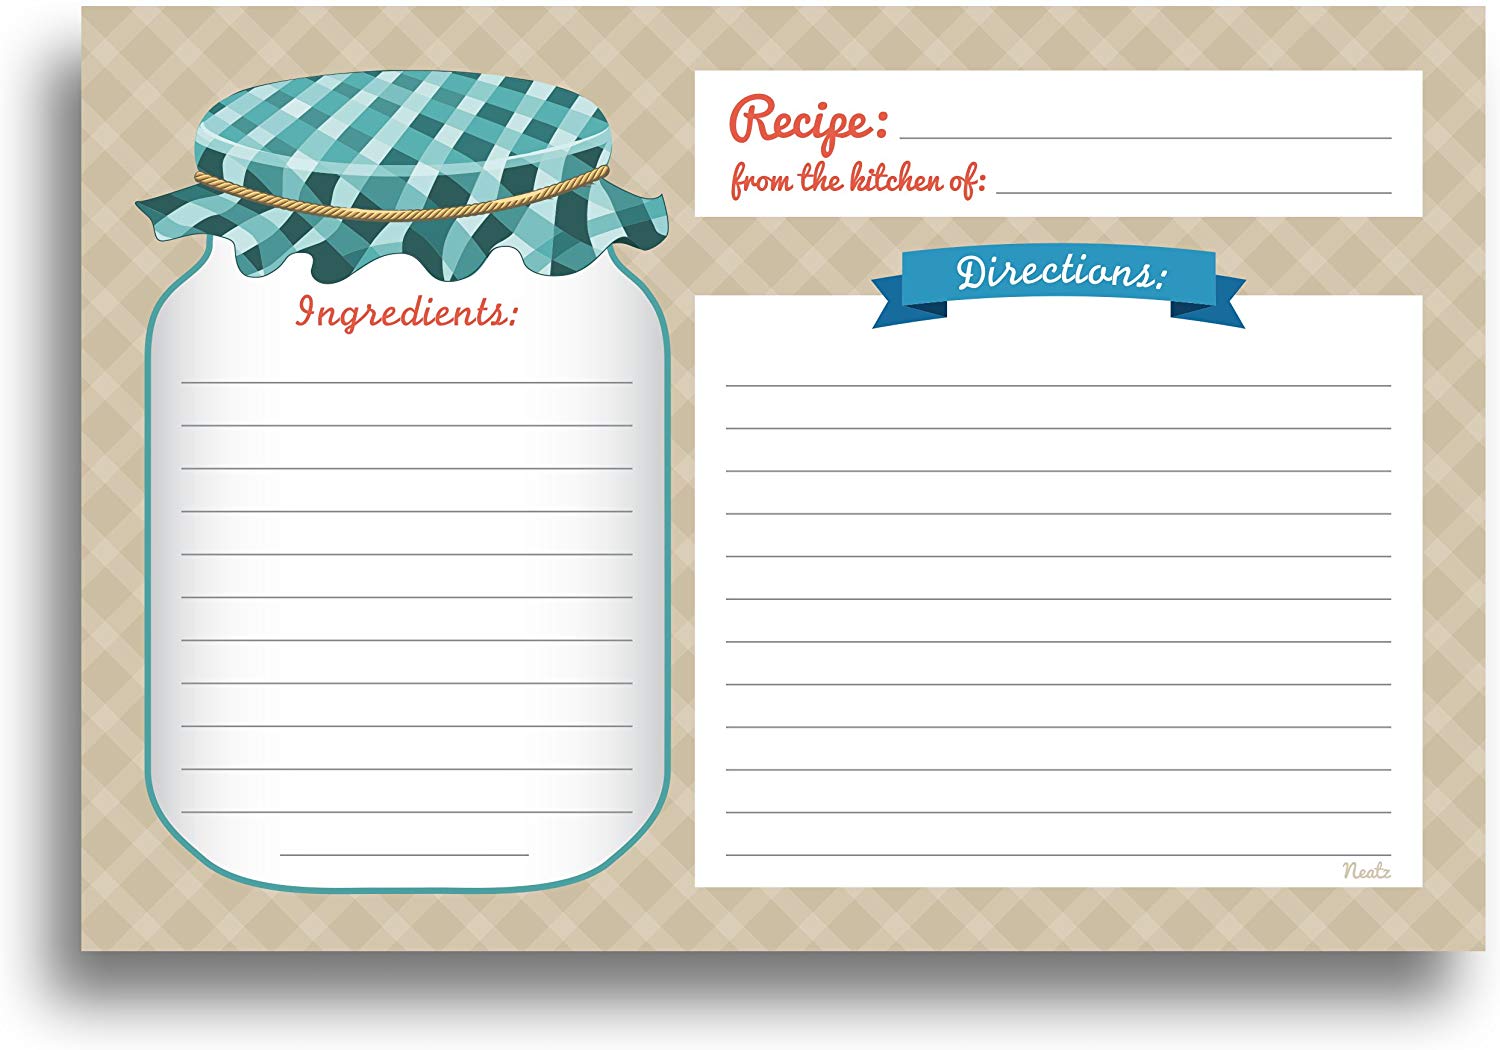 Mason Jar Recipe Cards - 50 Double Sided Cards, 4x6 inches. Thick Card Stock